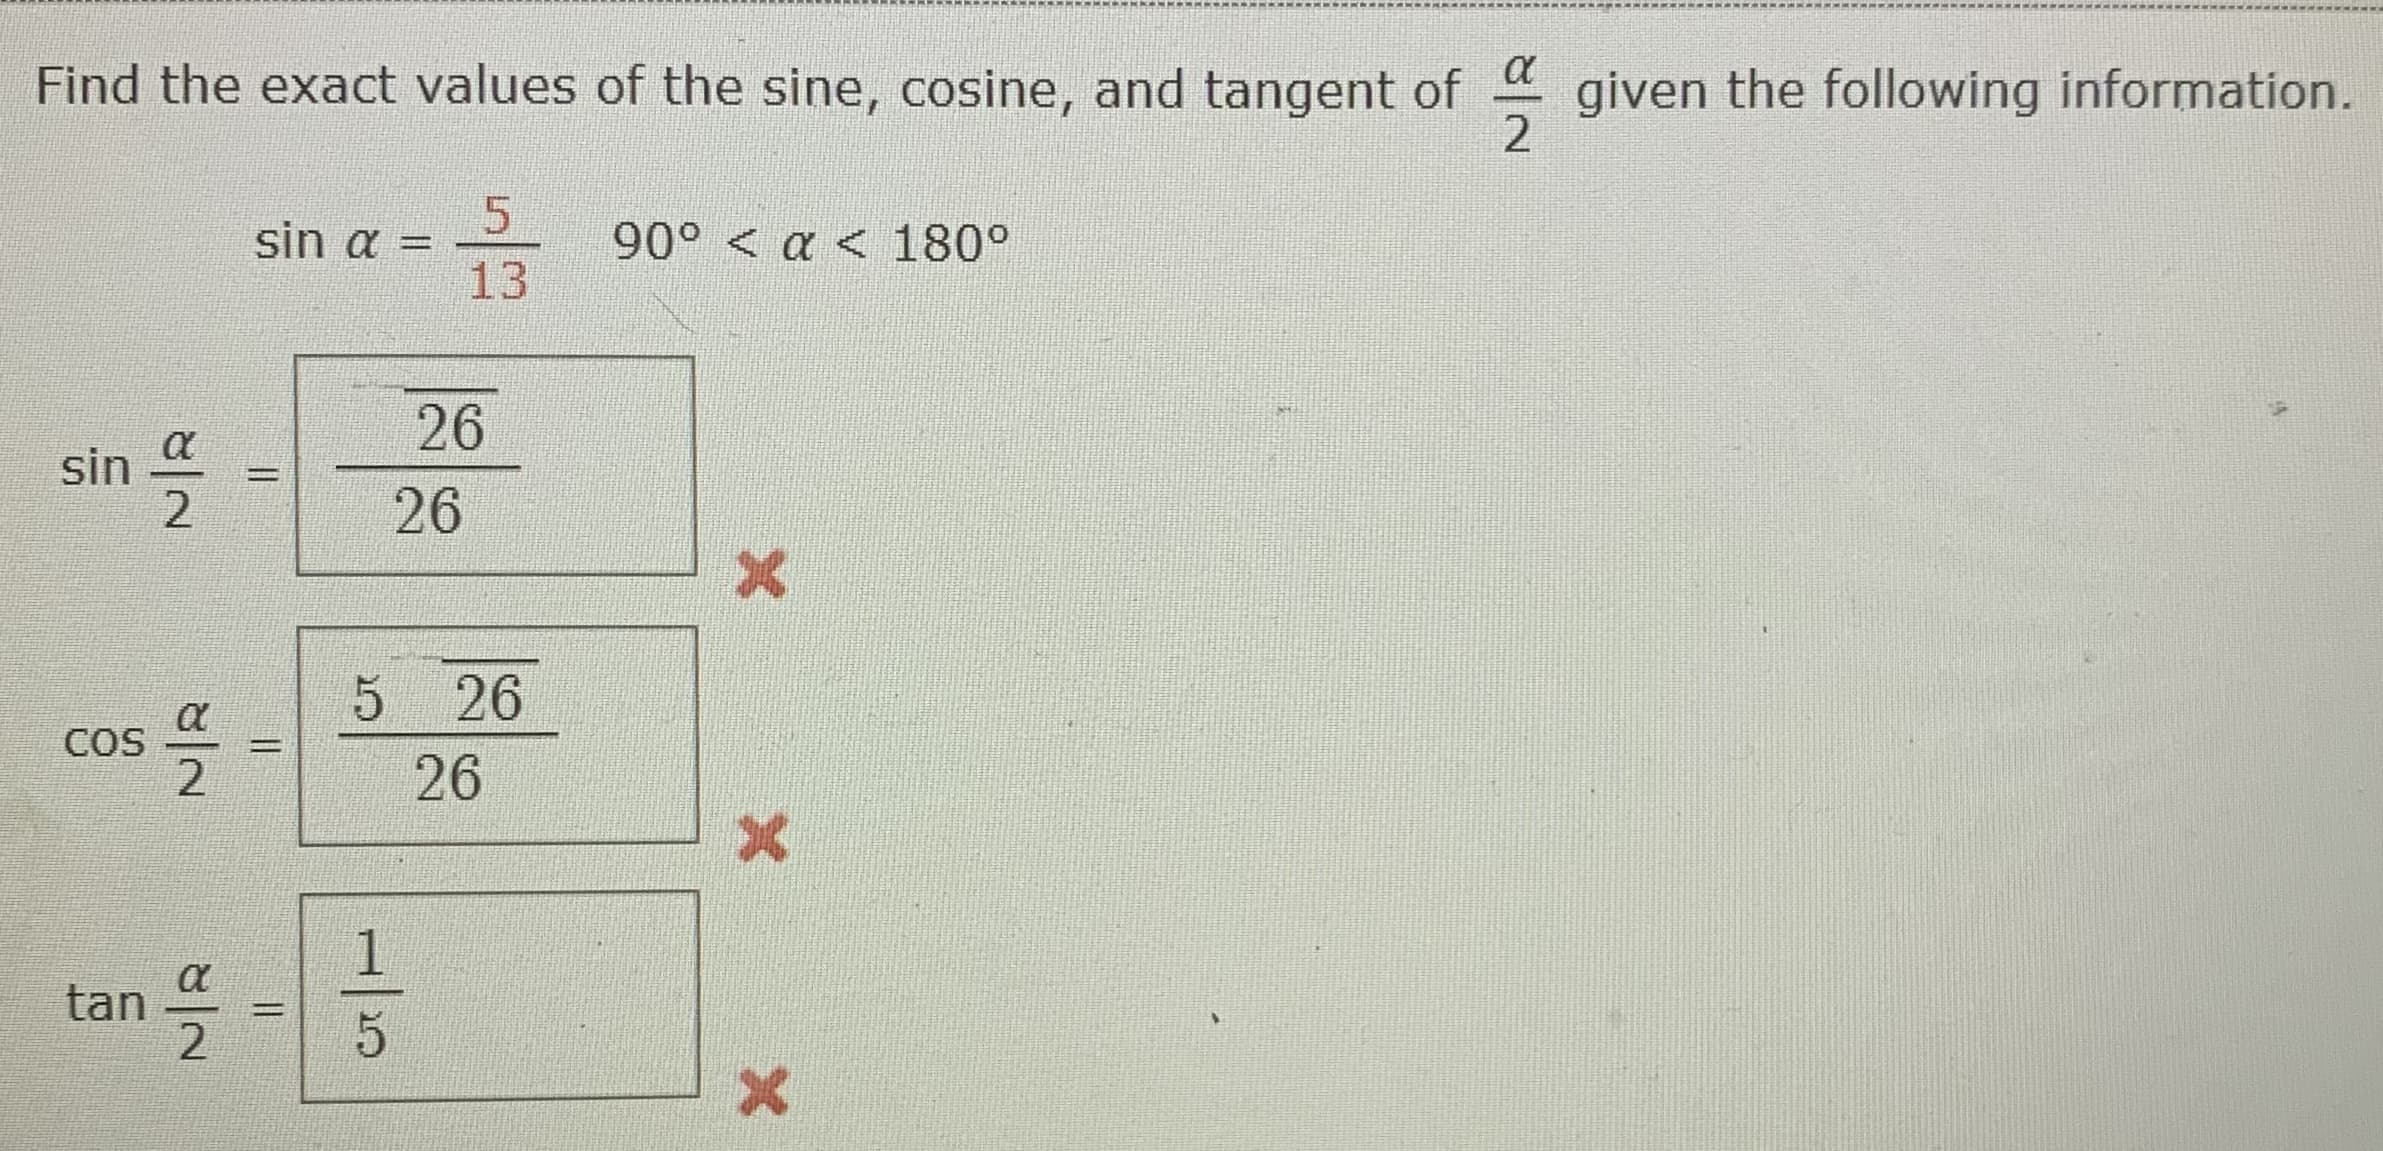 Find the exact values of the sine, cosine, and tangent of
given the following information.
2
Sin α-
13
900 α <1800
26
sin
2.
26
5 26
COS
26
tan
1/5
I|
/2
8/2
